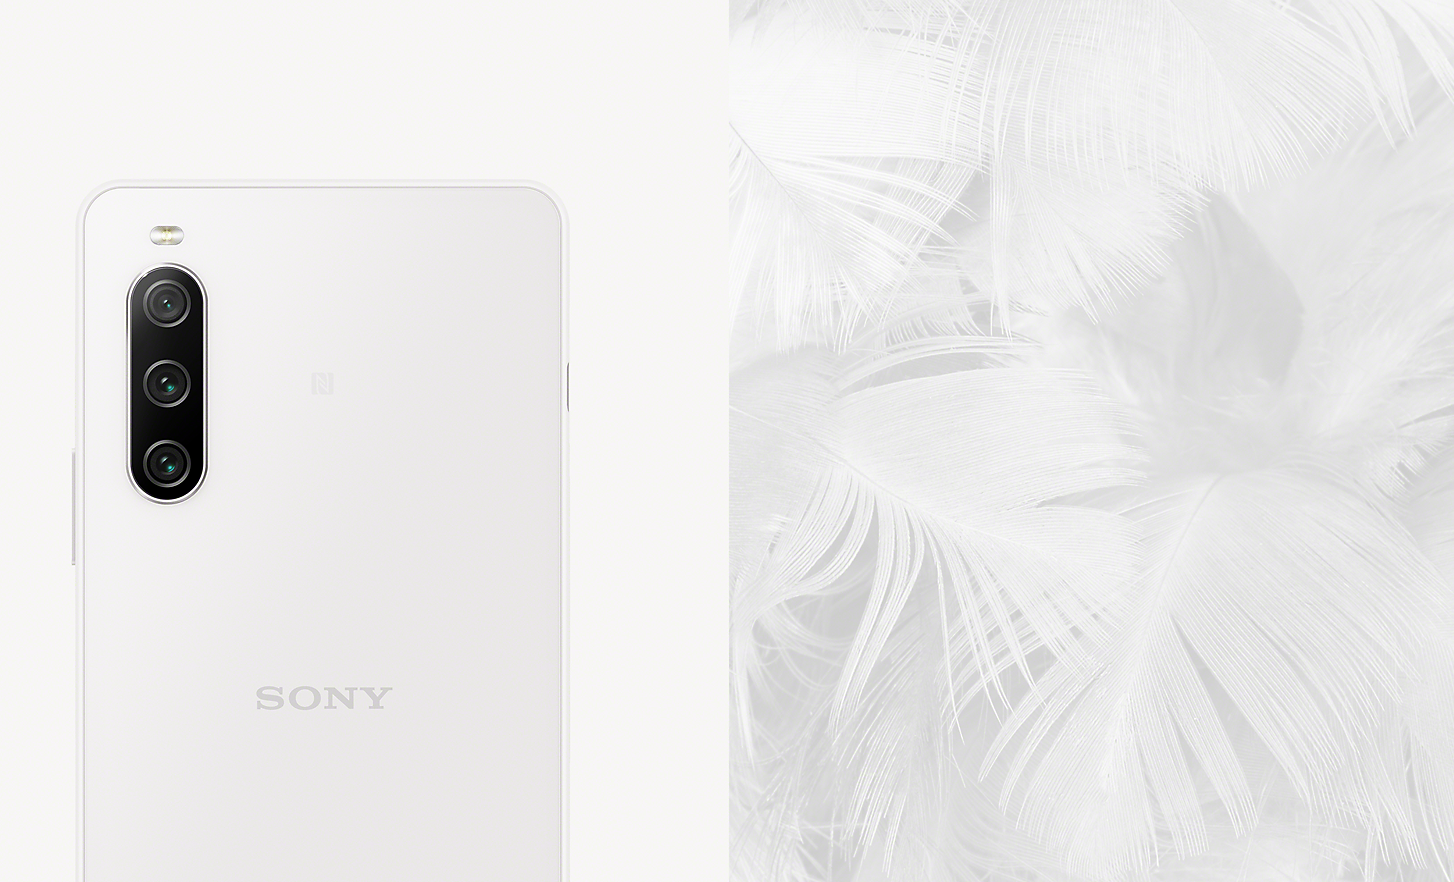 The Xperia 10 IV in white alongside an image of white feathers